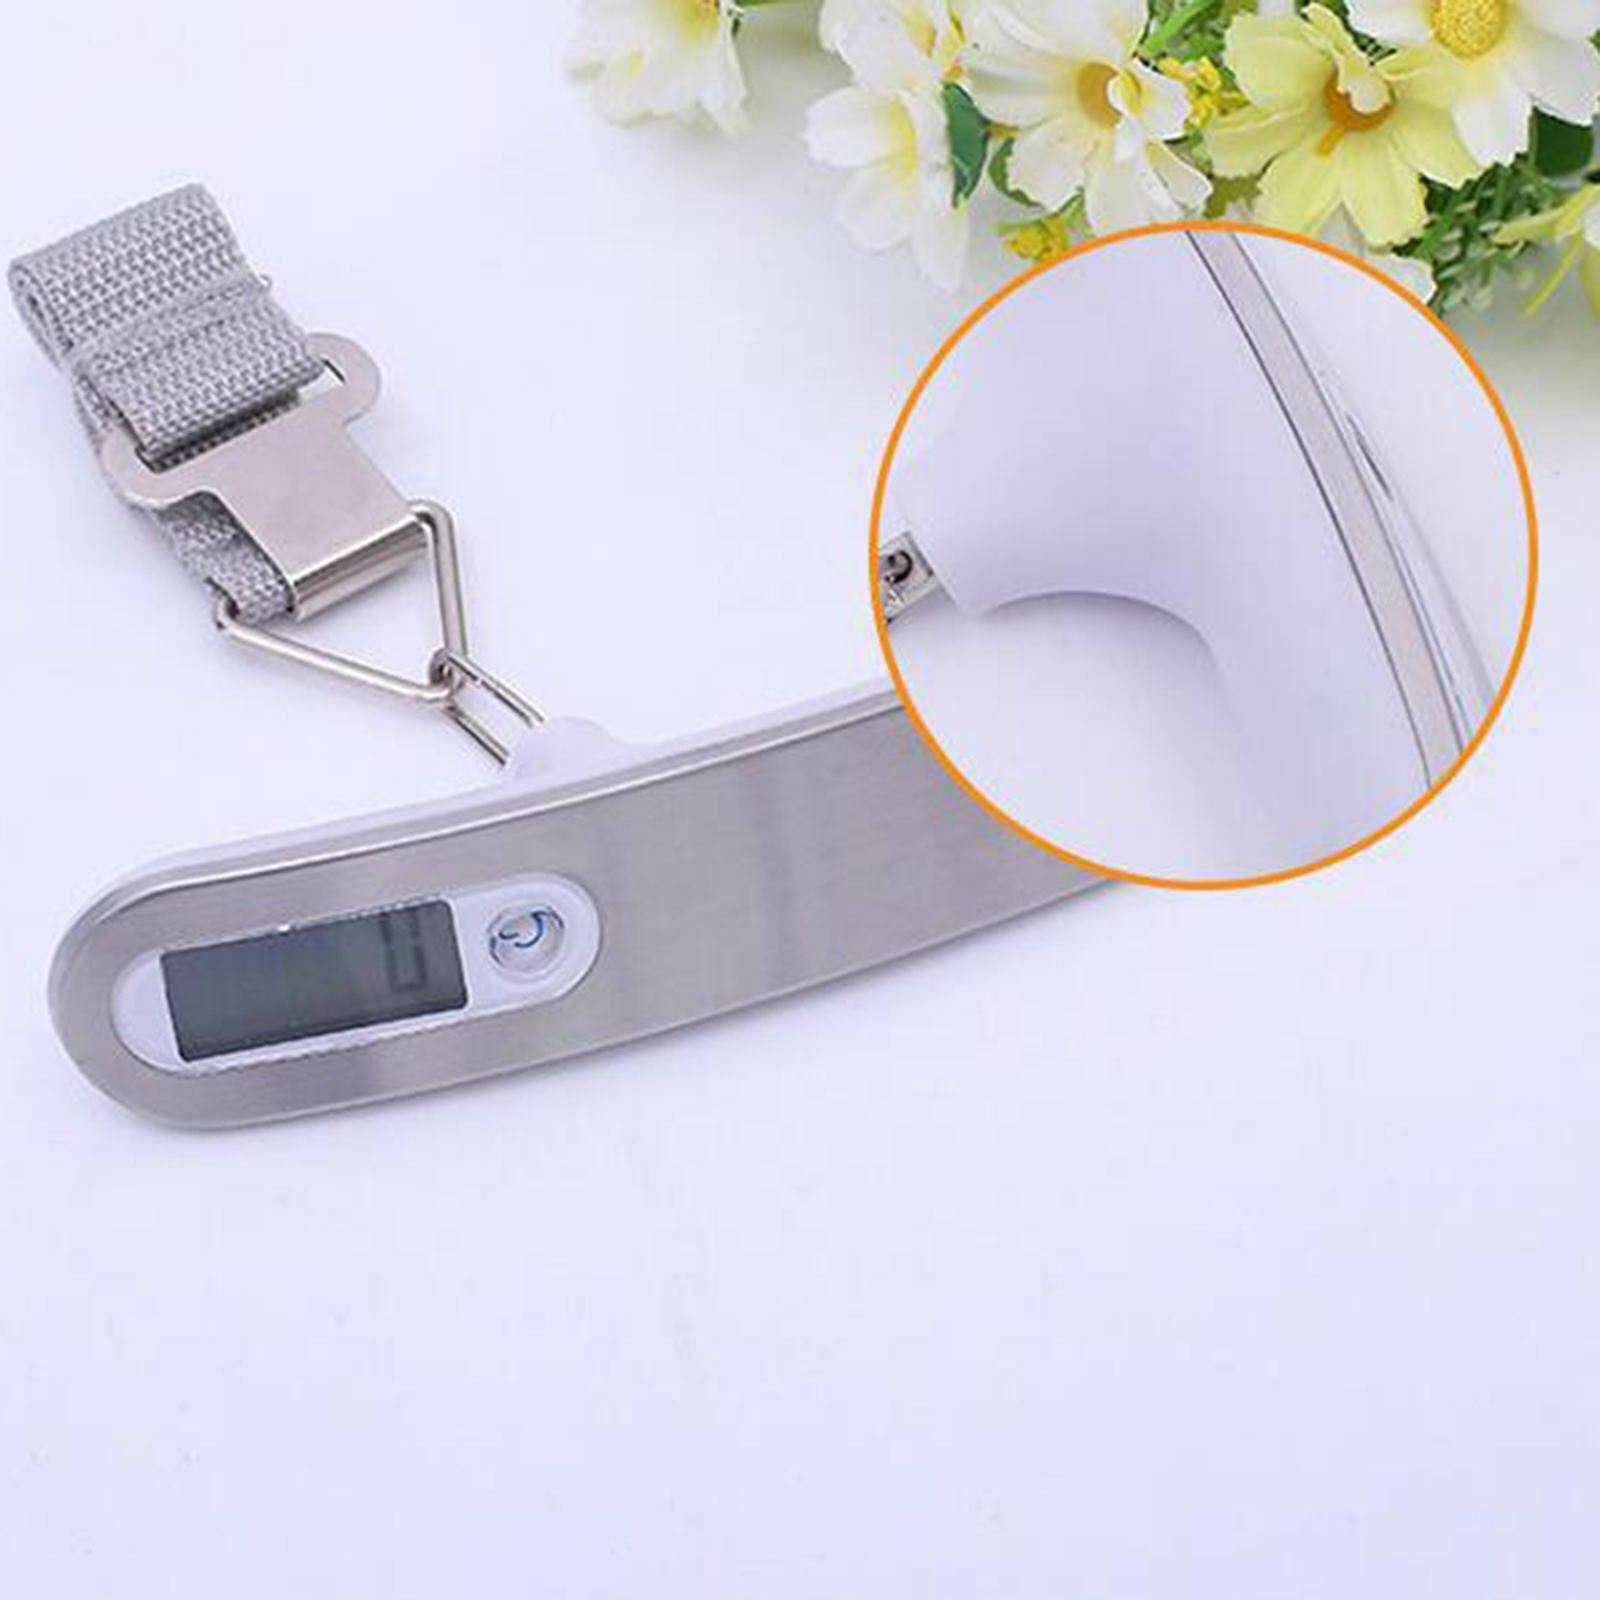 Portable Electronic Scale Handheld Precision 110lb/ 50kg for Outdoor Travel